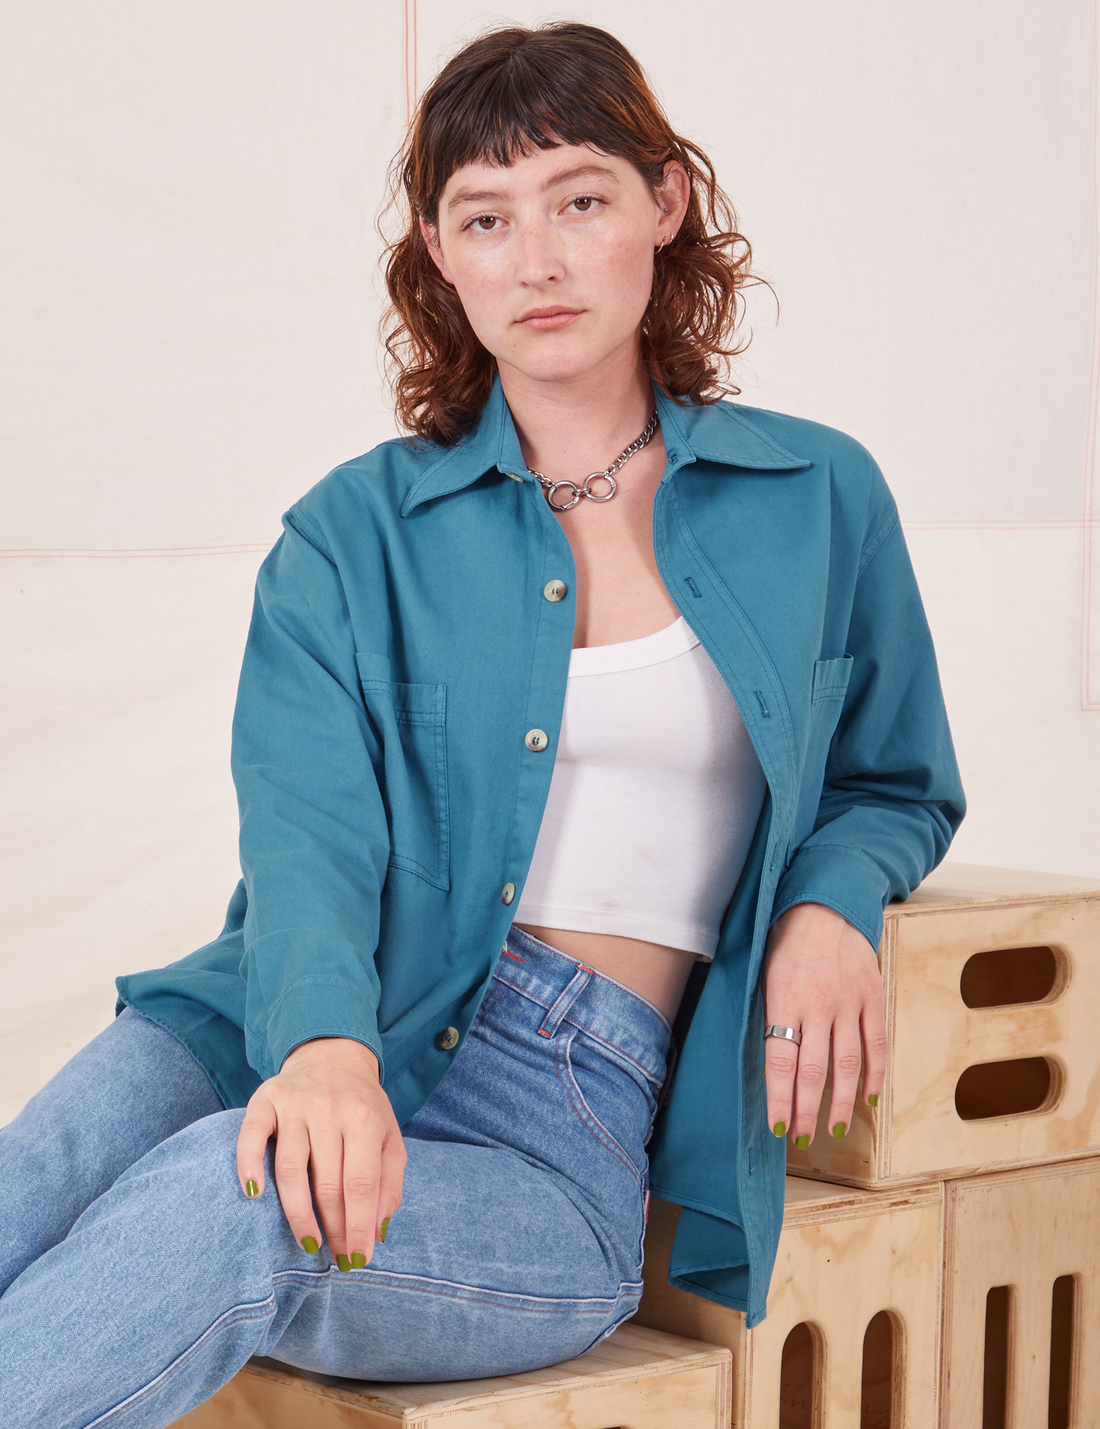 Alex is wearing Oversize Overshirt in Marine Blue with a vintage off-white Cropped Tank Top underneath